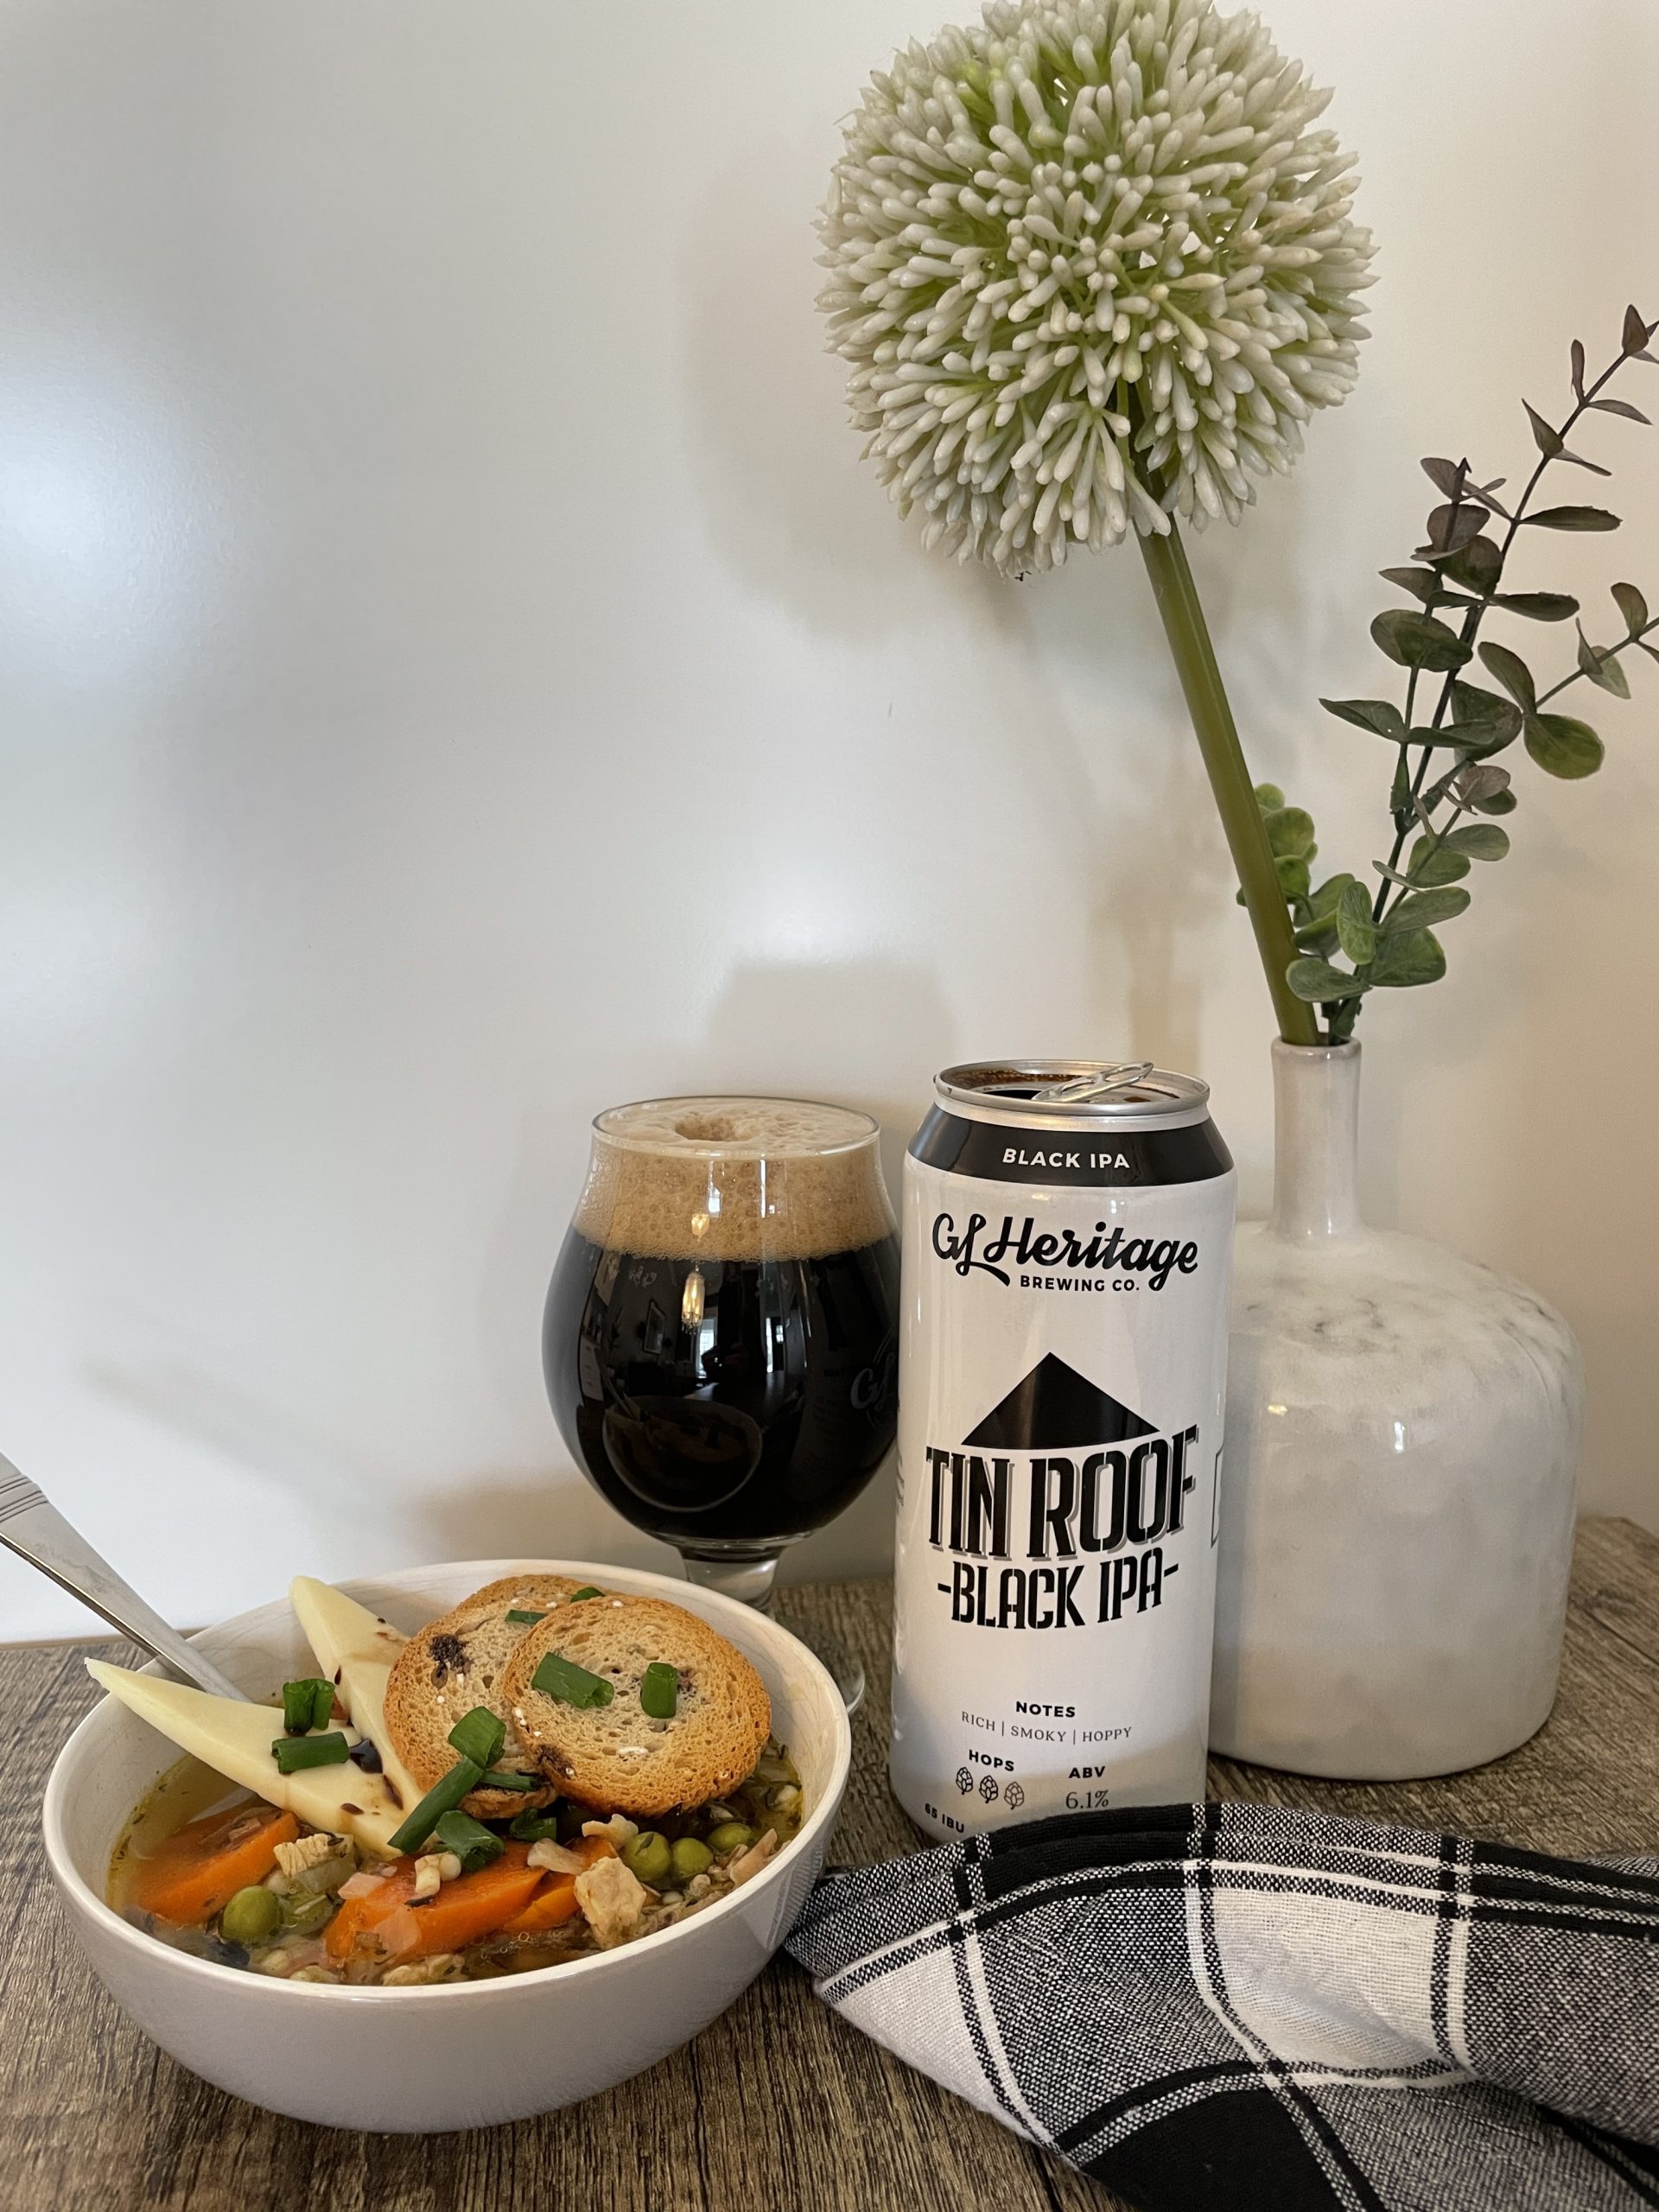 Featured image for “GL Heritage Black IPA Tin Roof with Chicken Vegetable Soup.”